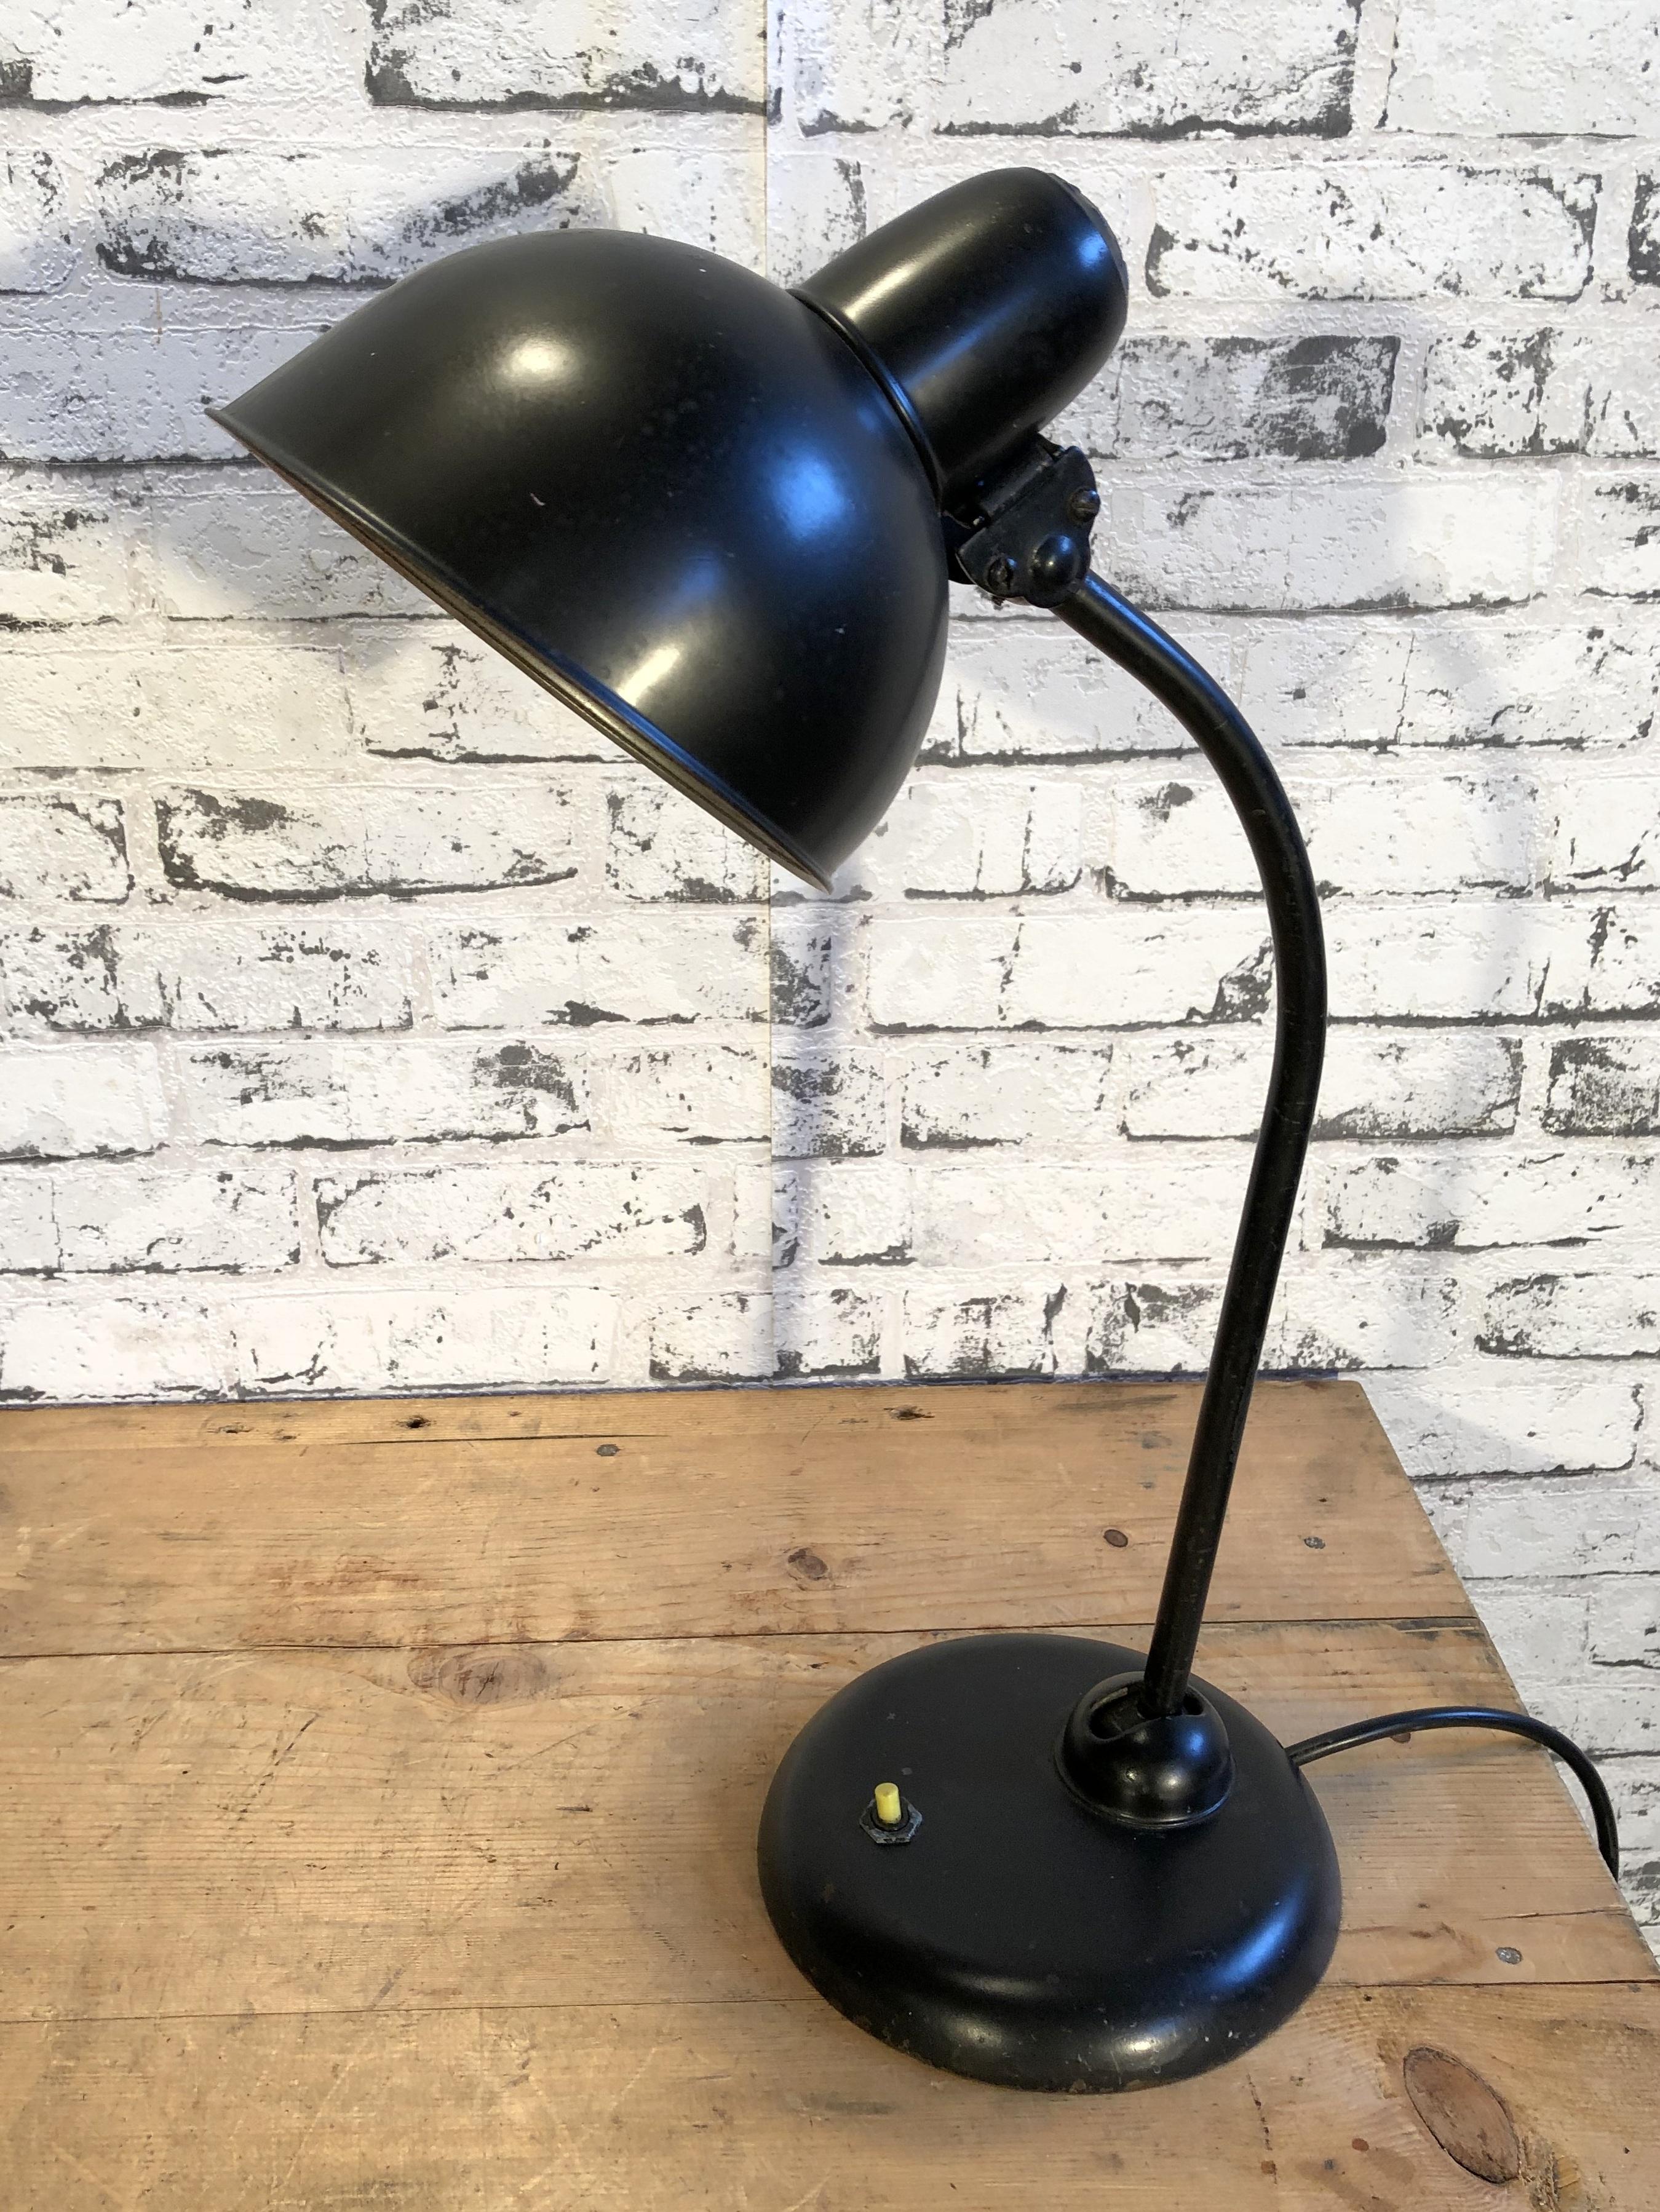 Rare edition Kaiser Idell model 6551 desk lamp designed by Bauhaus designer Christian Dell. This model was manufactured in 1930s and embossed 'Original Jdell' on the shade instead of the 'Kaiser-Idell Original' on the later models. Good vintage